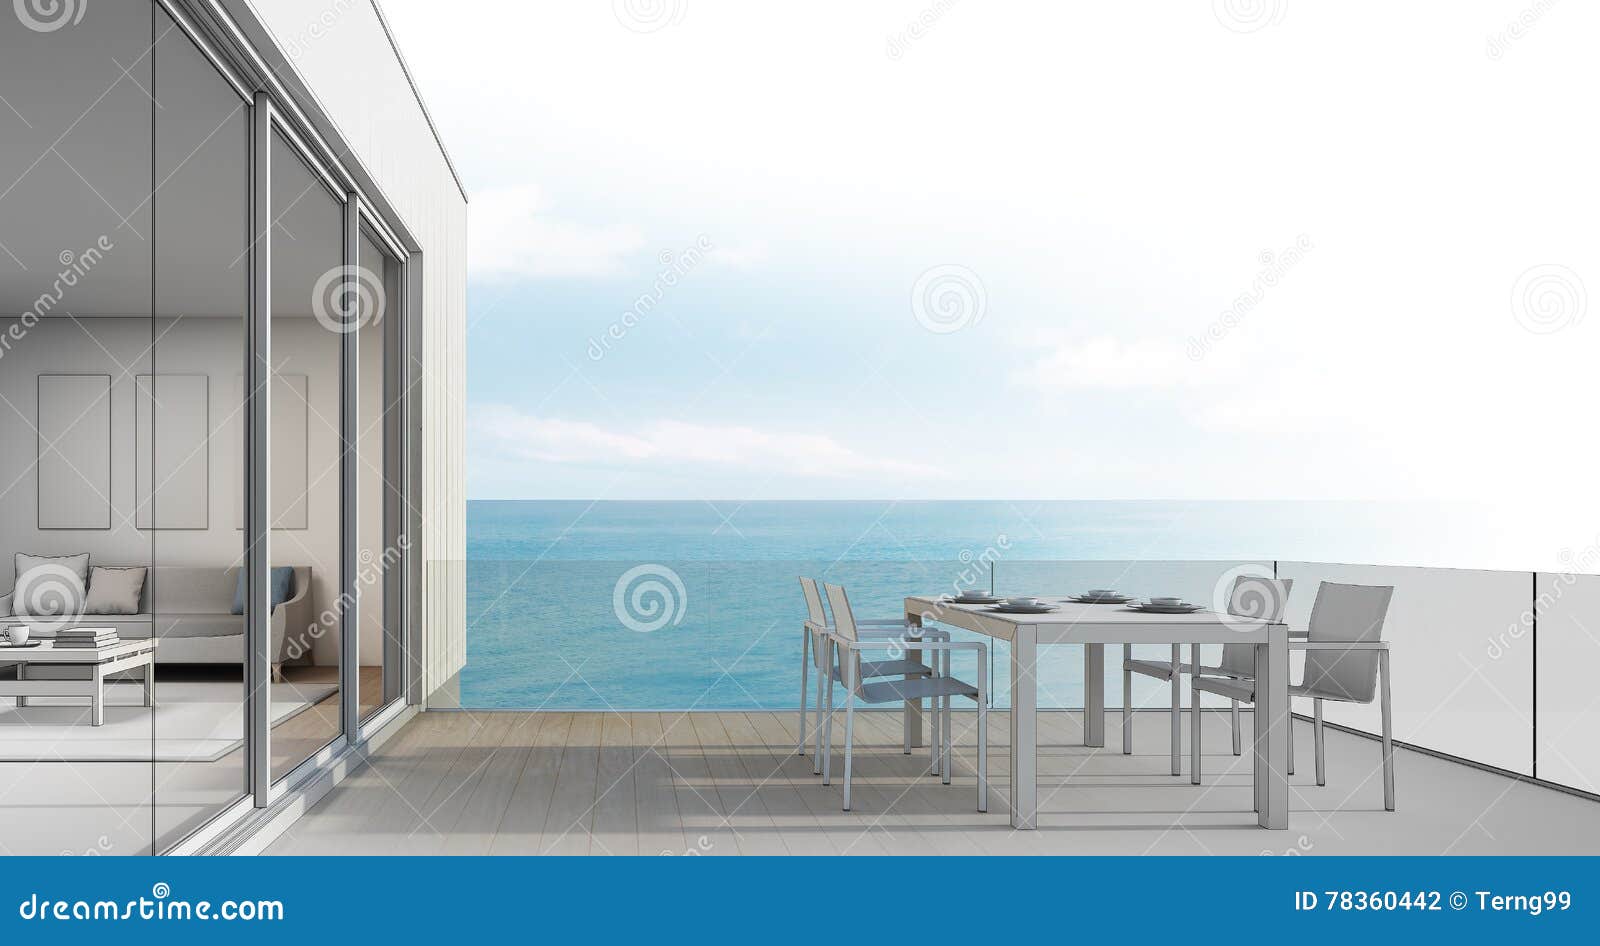 iBeach House Sketchi Design Outdoor Dining With Sea View 